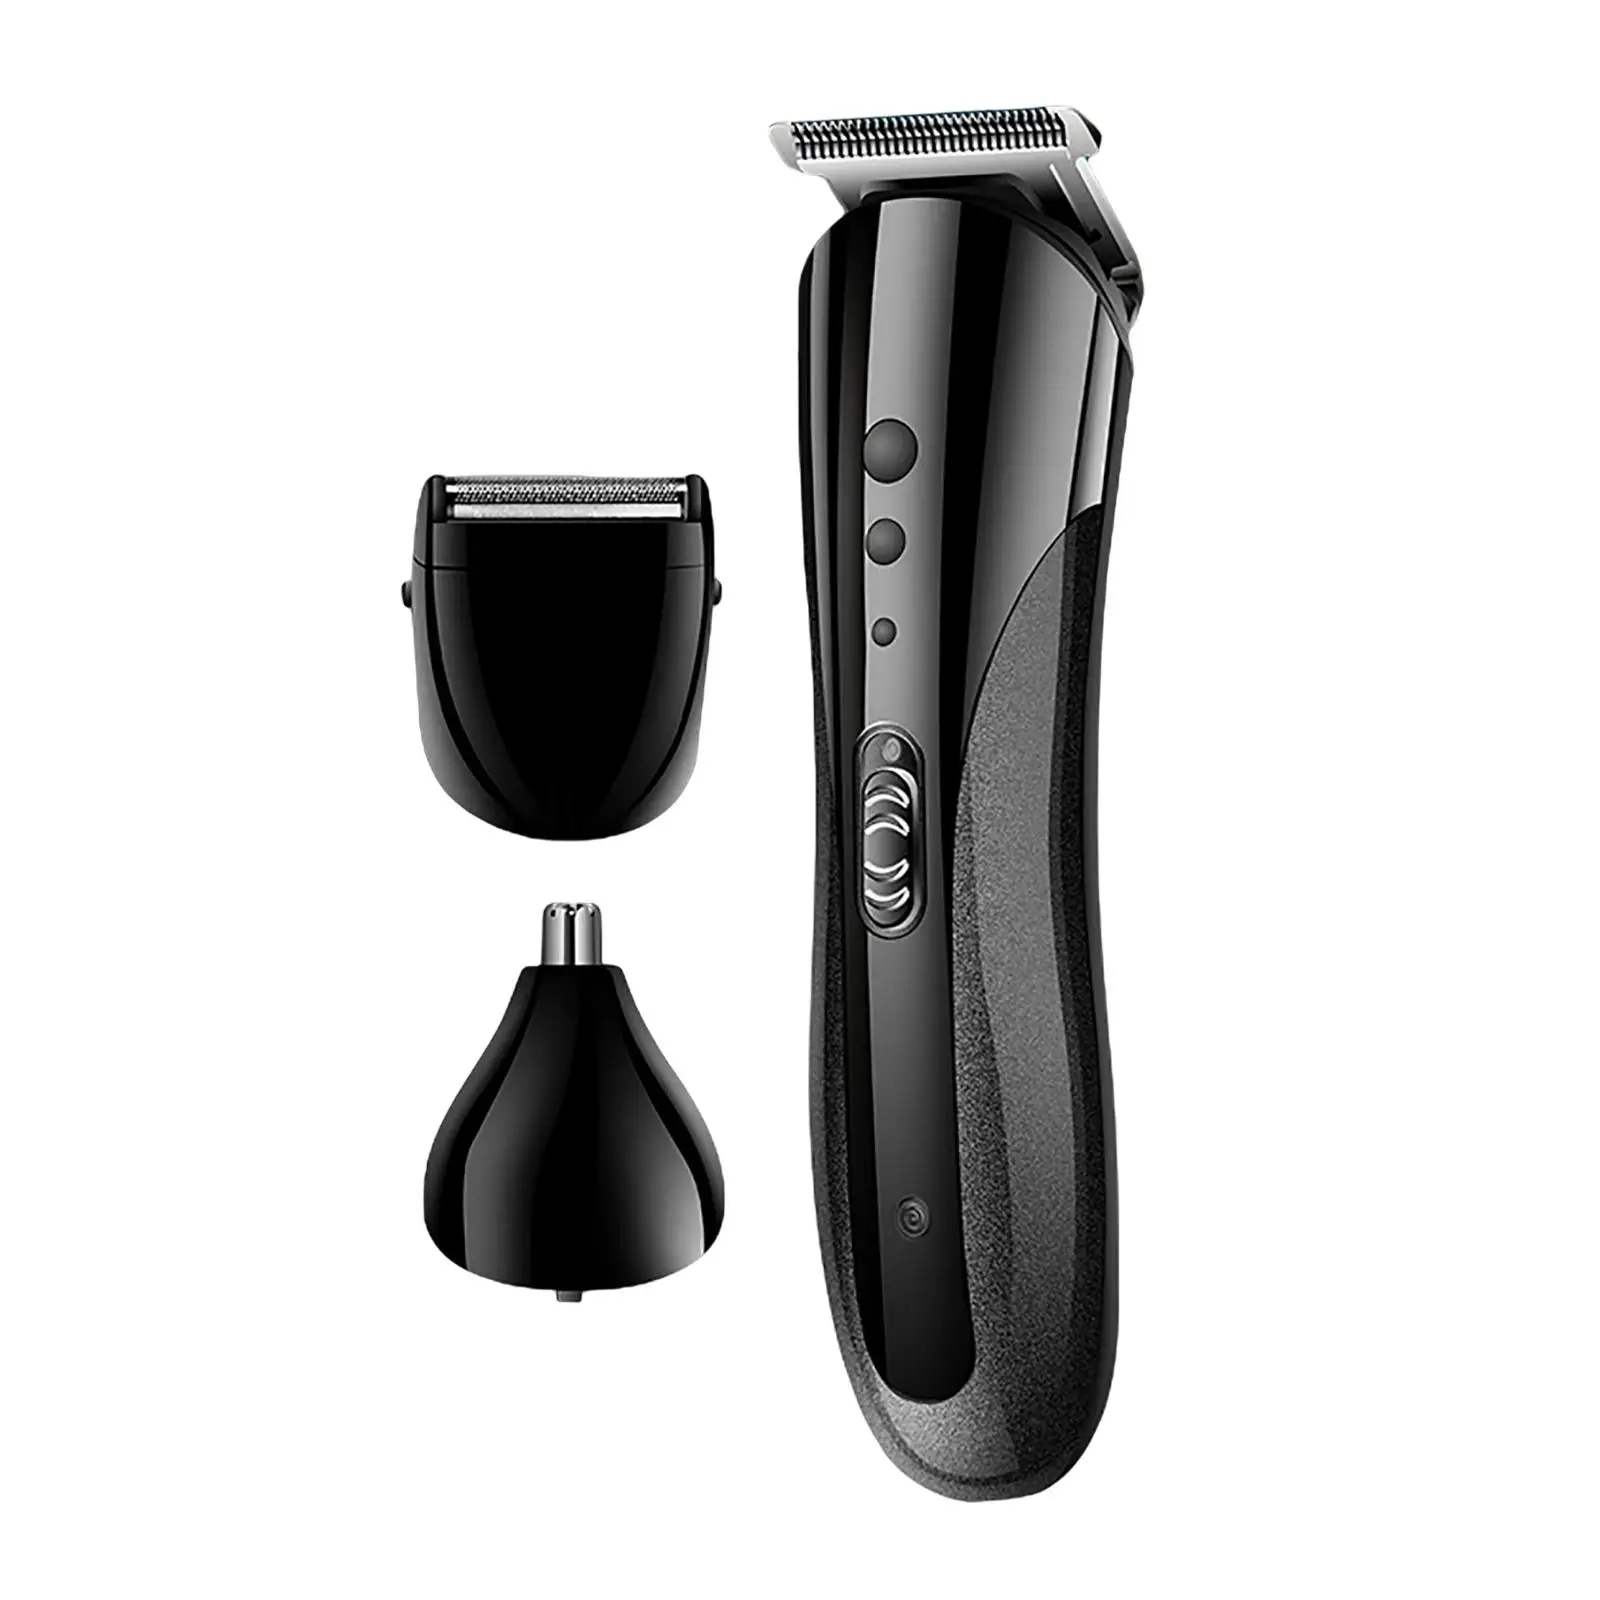 Beard Trimmer Hair Clippers Rechargeable Plug: UK Durable Built-In Battery for Men Barber Tool Grooming Kit ,4 Limited Comb